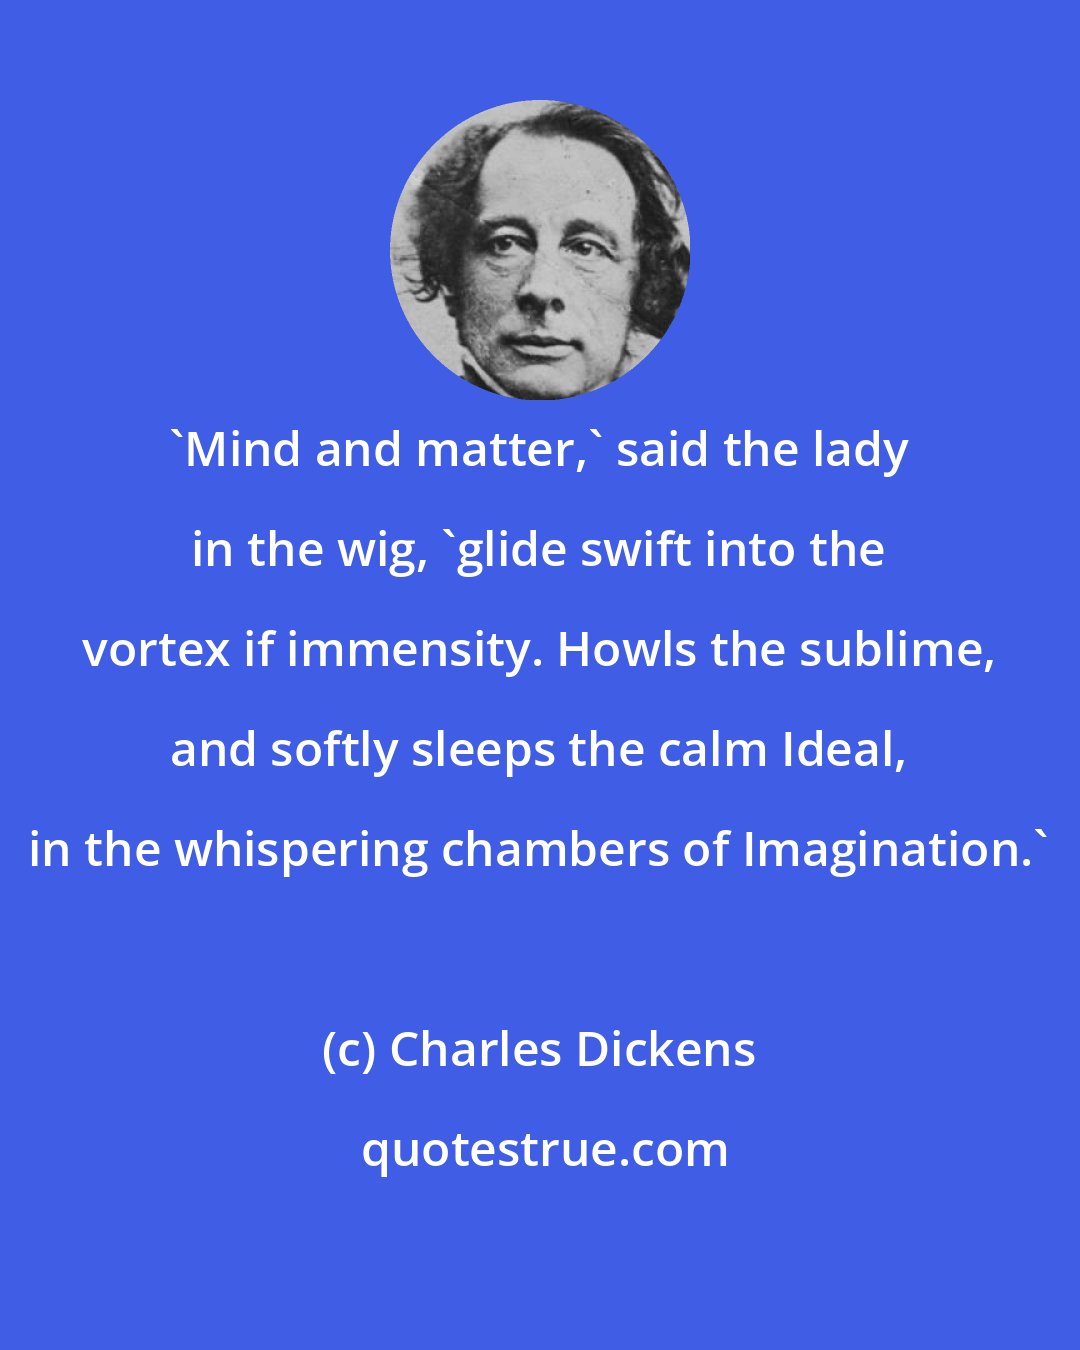 Charles Dickens: 'Mind and matter,' said the lady in the wig, 'glide swift into the vortex if immensity. Howls the sublime, and softly sleeps the calm Ideal, in the whispering chambers of Imagination.'